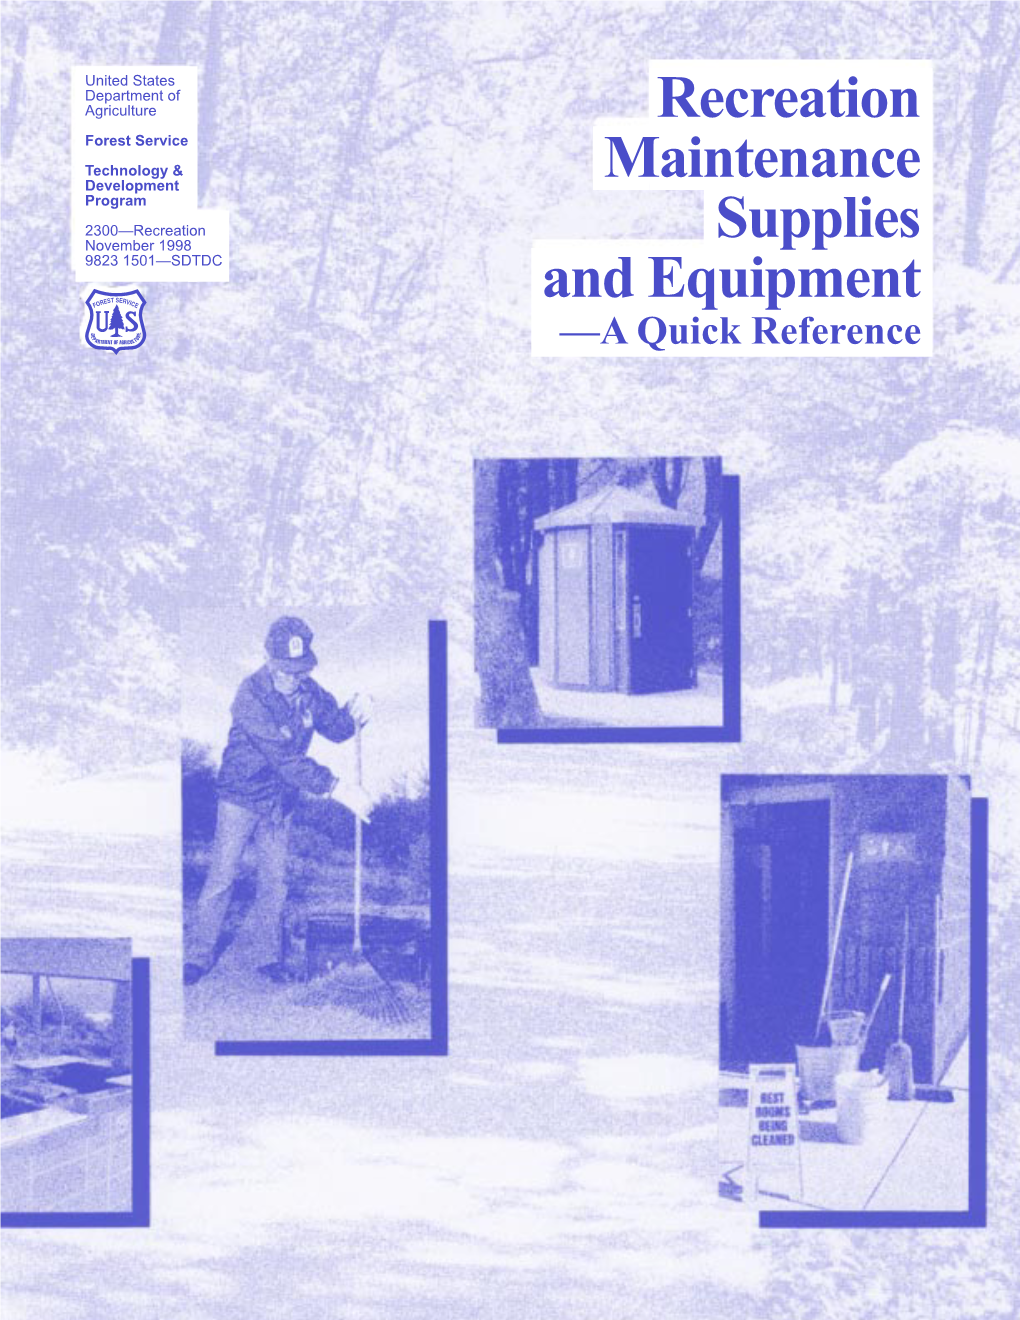 Recreation Maintenance Supplies and Equipment —A Quick Reference